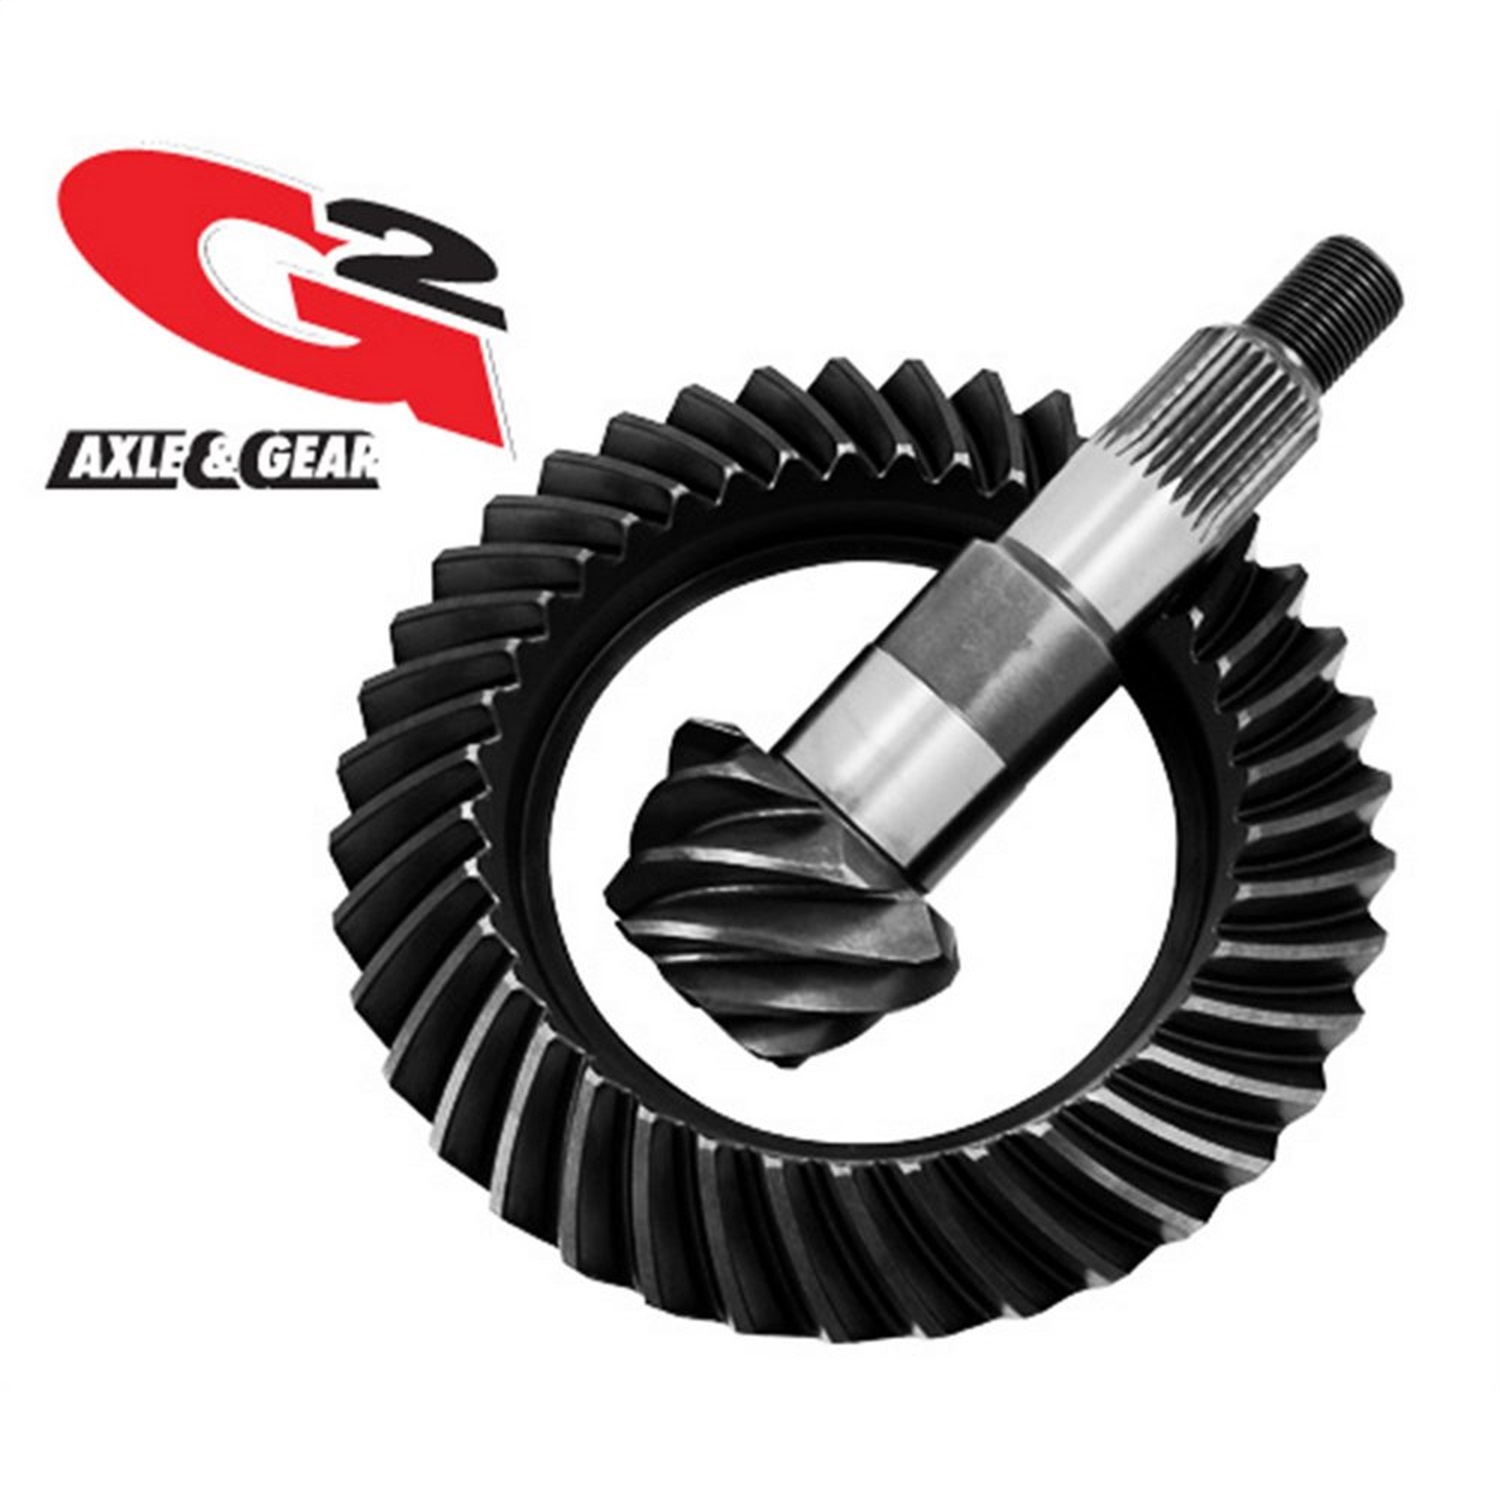 G2 Axle and Gear G2 Axle and Gear 2-2046-355L Ring and Pinion